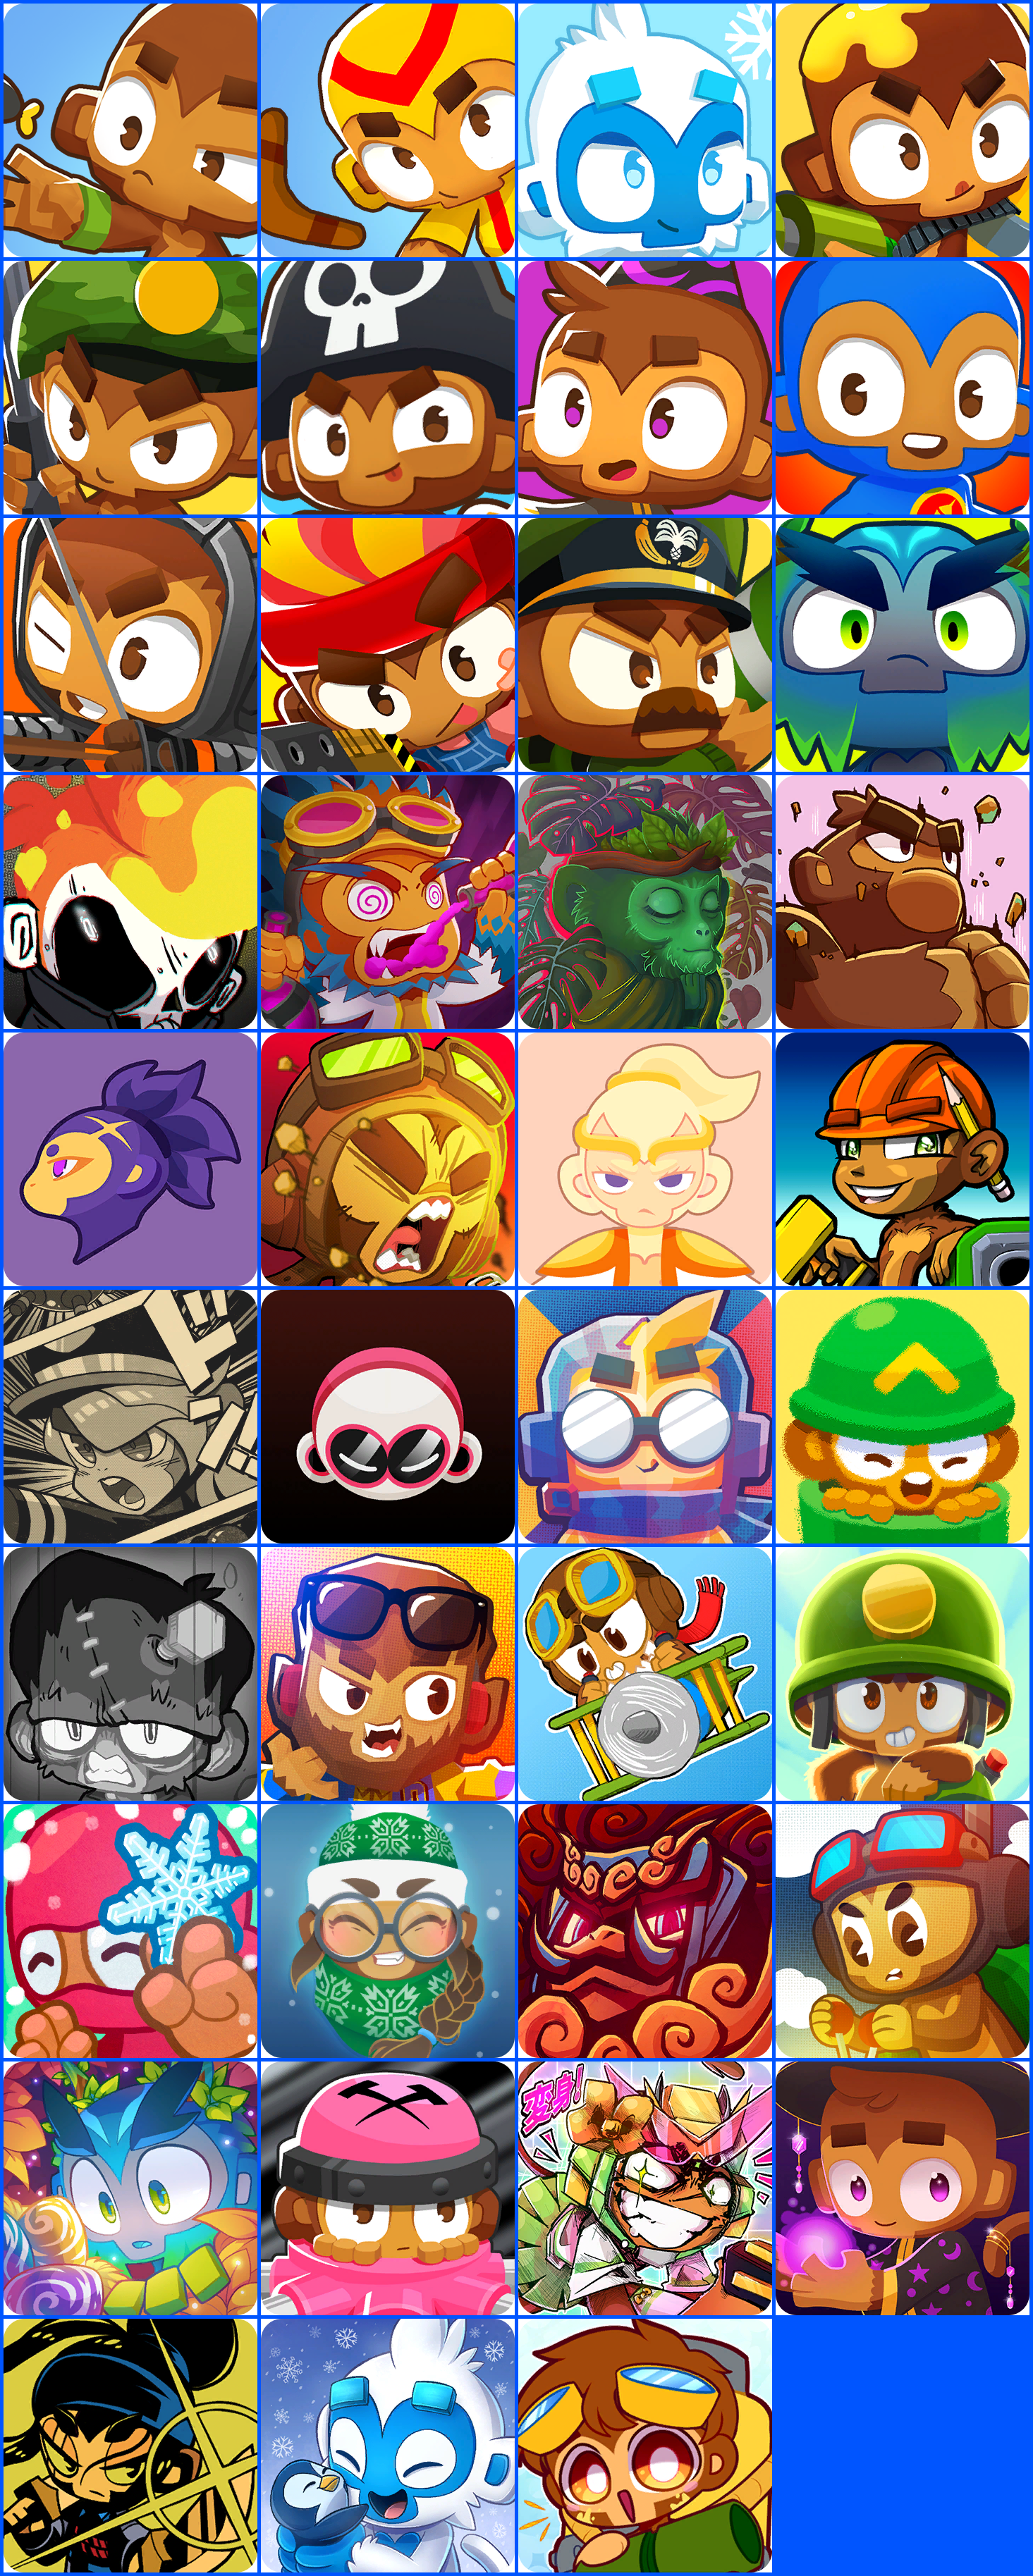 Bloons Tower Defense 6 - Profile Avatars